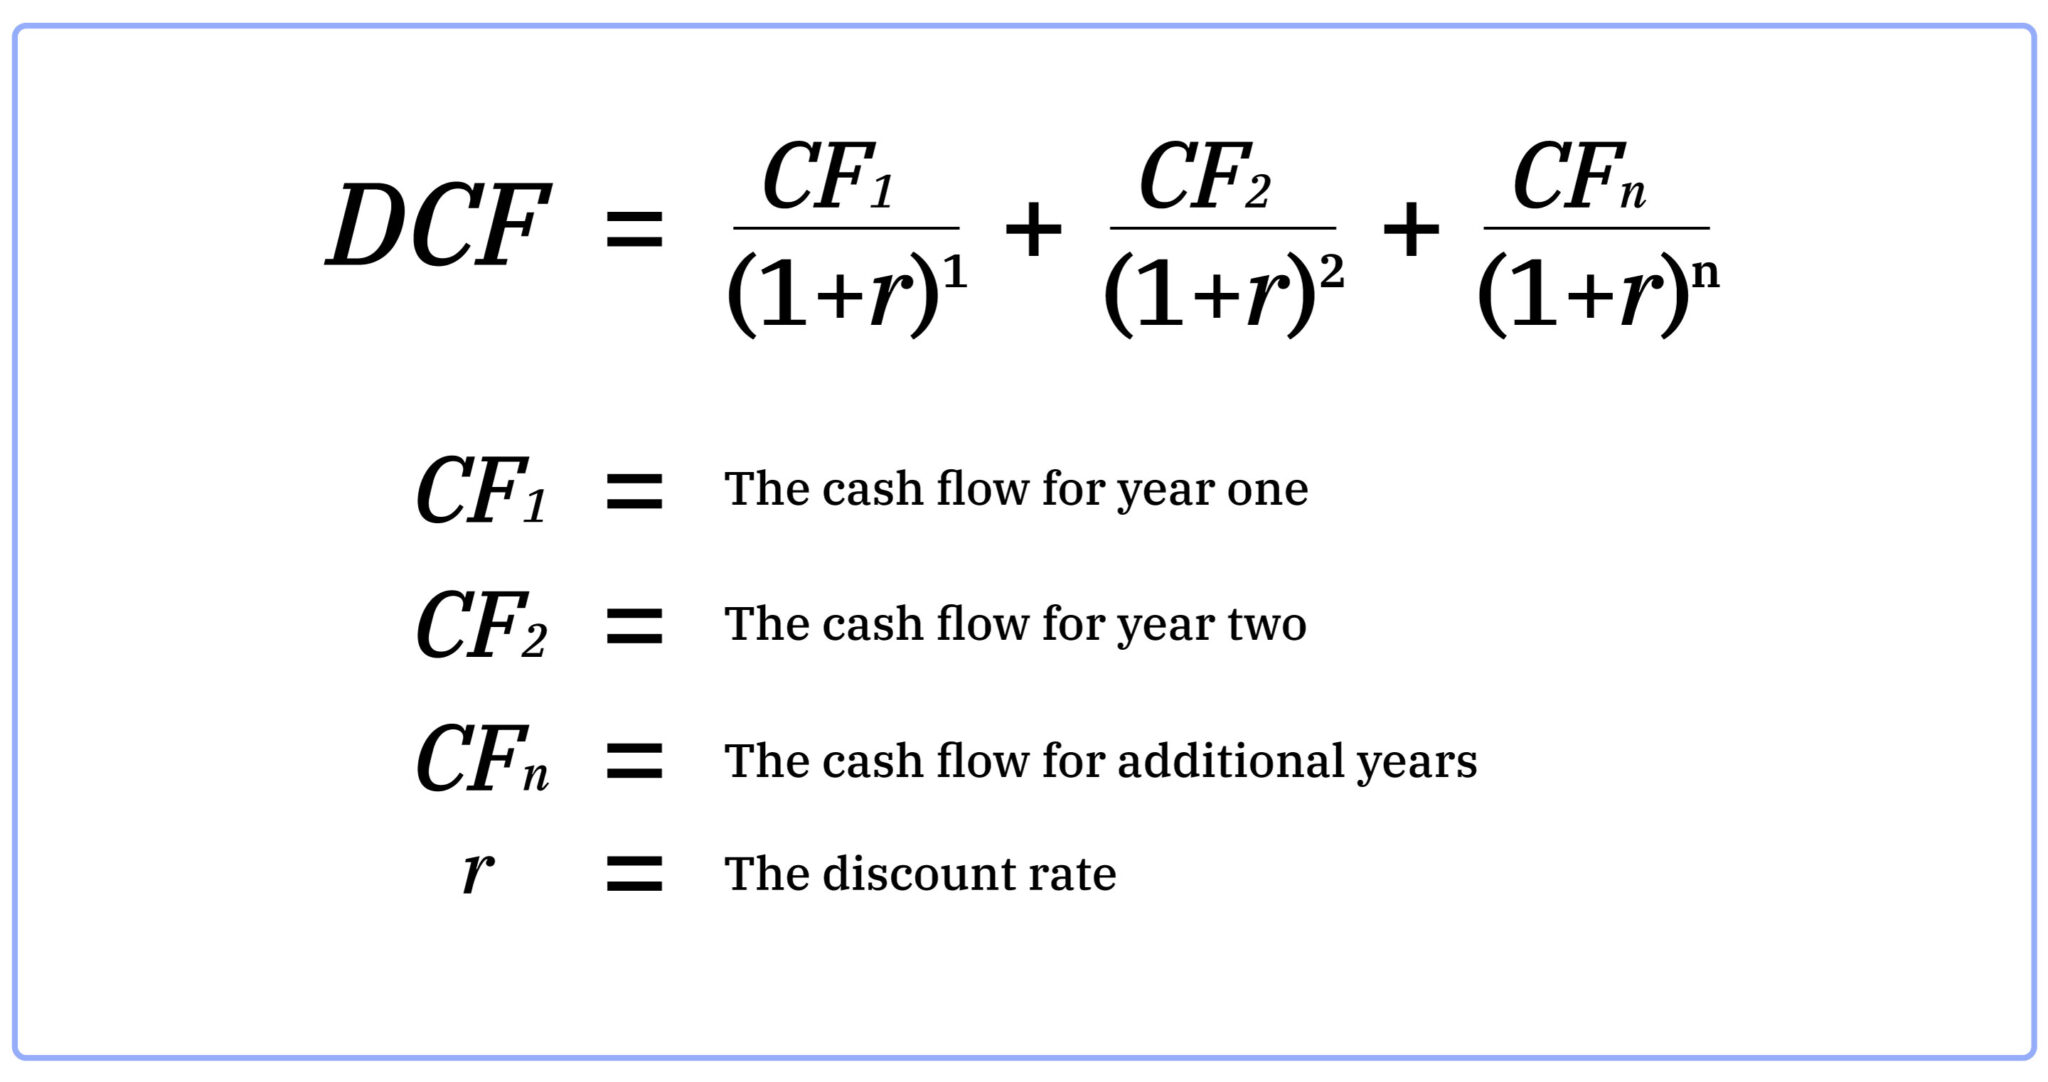 Discounted Cash Flow Model in Excel - Solving Finance